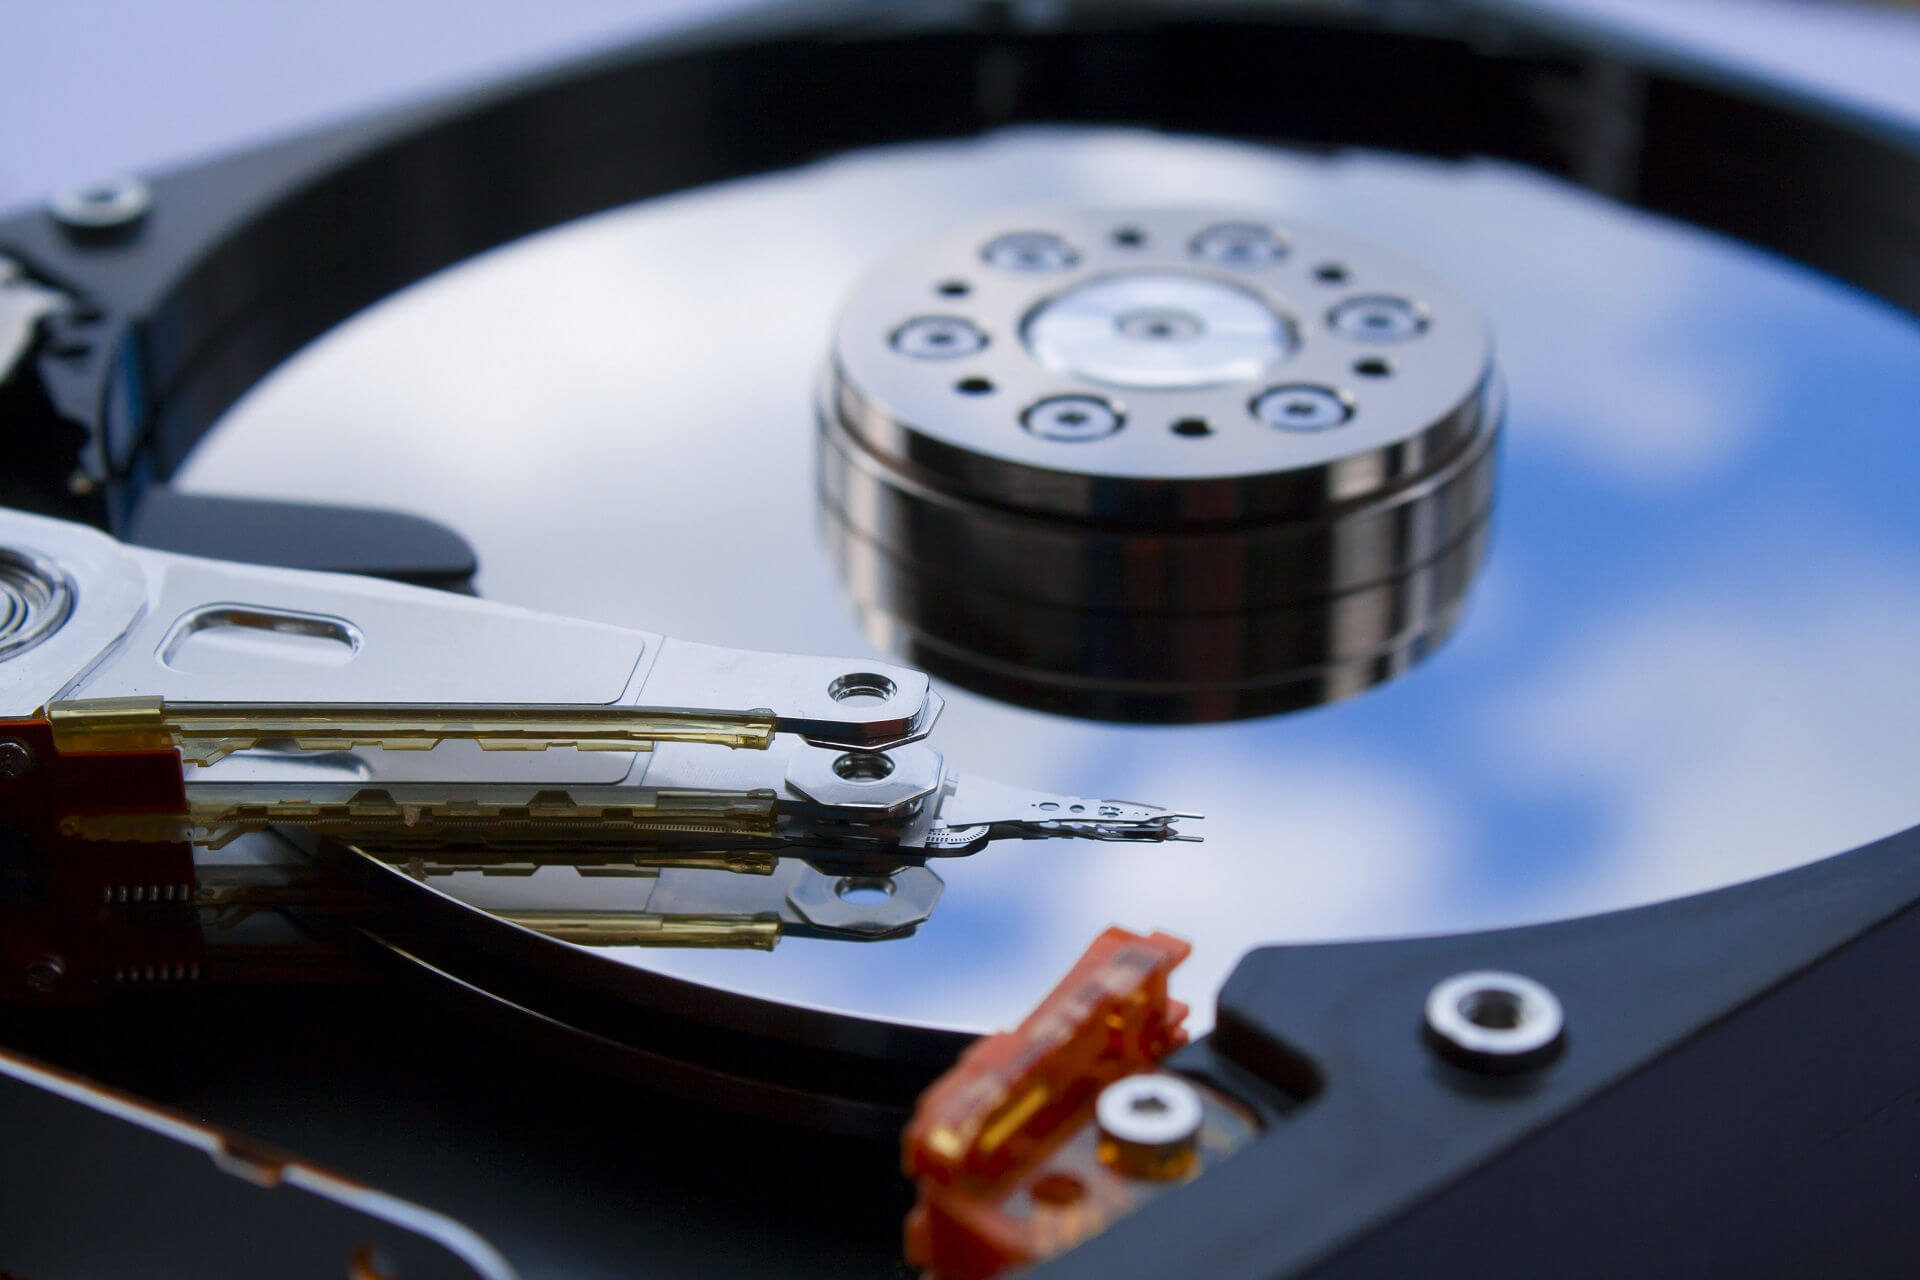 How to fix xbox not recognize external hard drive